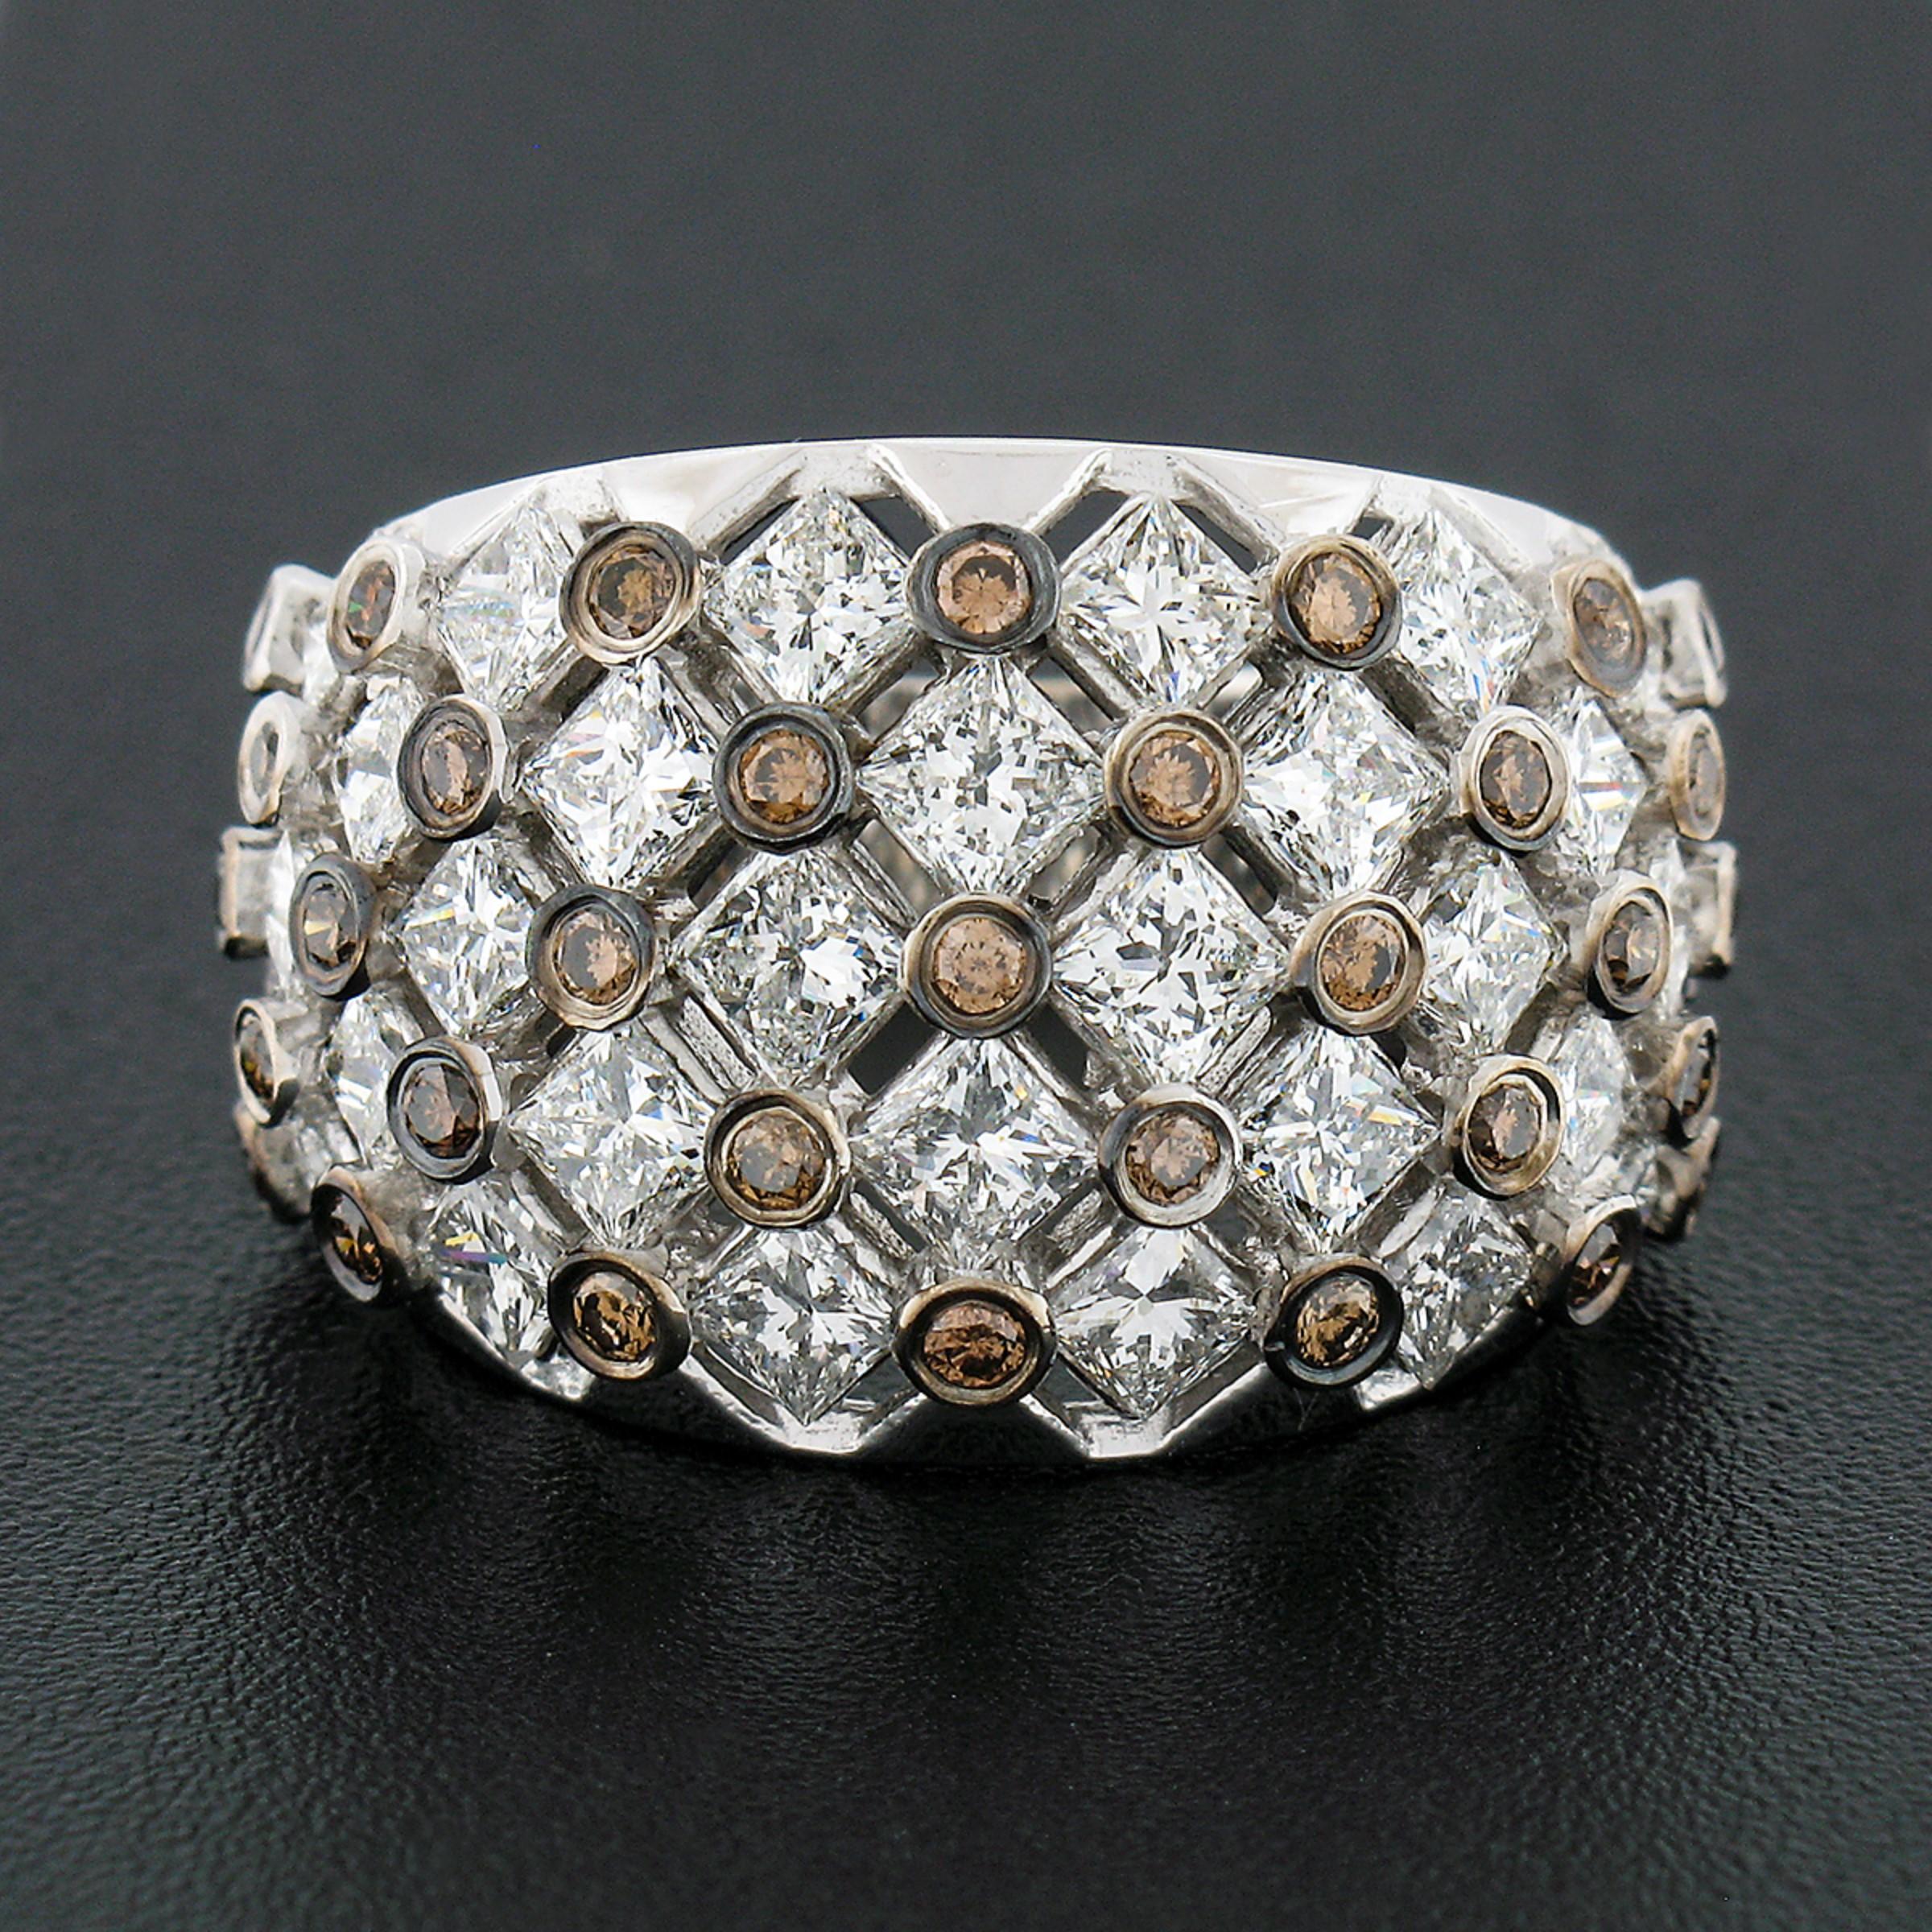 He we have an absolutely magnificent and fancy band ring that was crafted in solid 14k white gold and designed by Effy, featuring a wide and slightly domed top that is completely drenched with fine quality diamonds throughout. Its open top displays